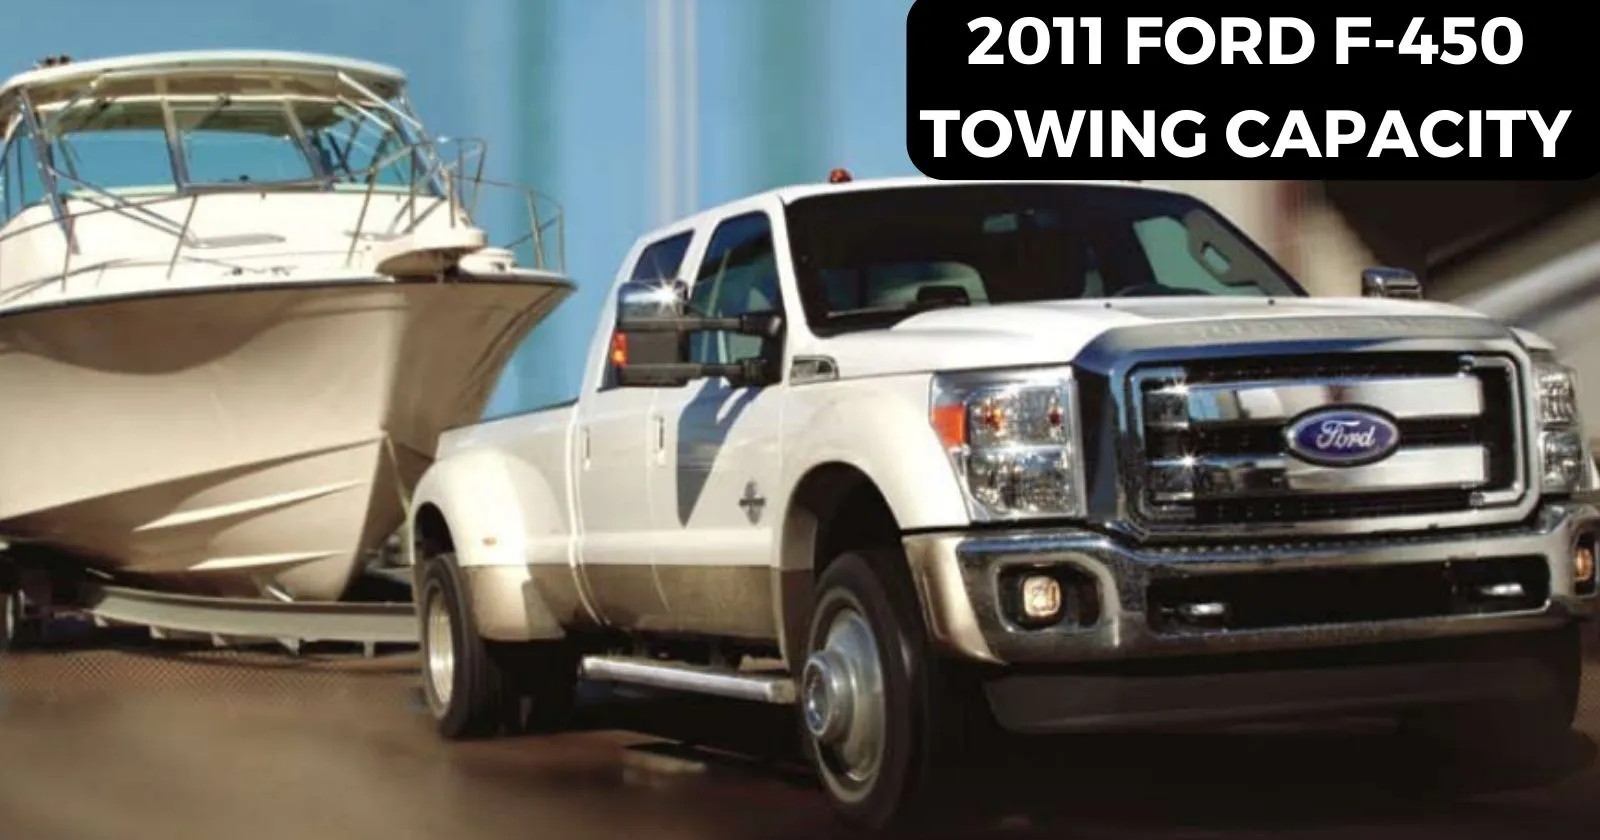 explore-2011-ford-f450-towing-capacity-with-charts-thecartowing